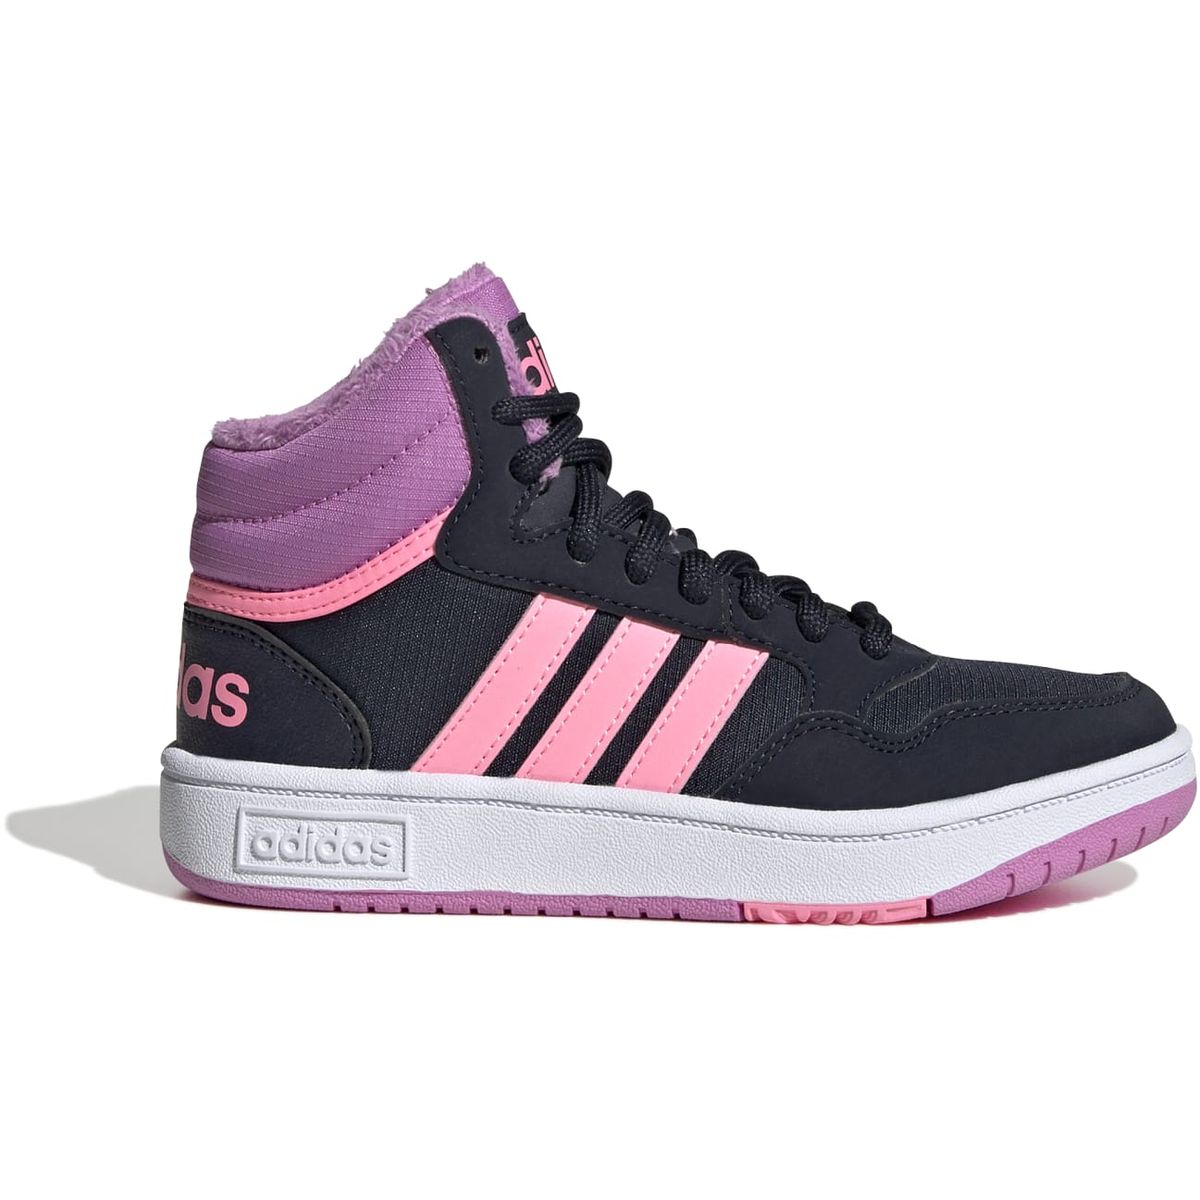 Adidas Hoops Mid Lifestyle Basketball Lace Schuh Kinder